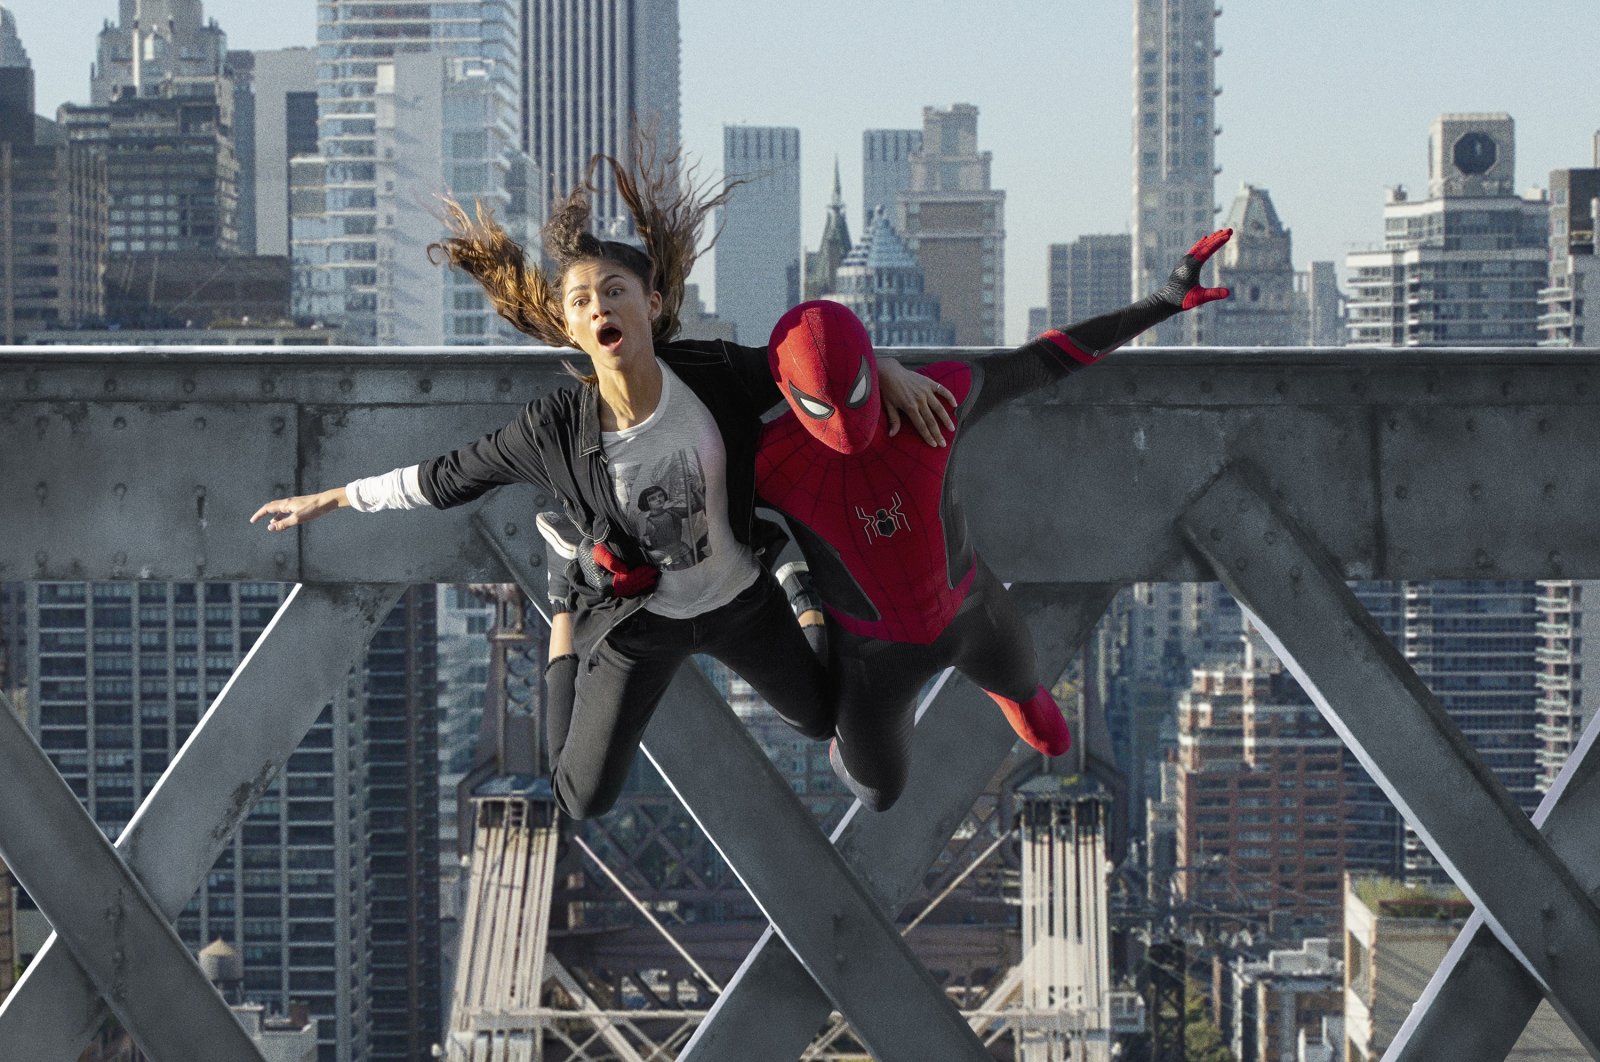 Zendaya (L) and Tom Holland, in a scene from the film &quot;Spider-Man: No Way Home.&quot; (Sony Pictures via AP)